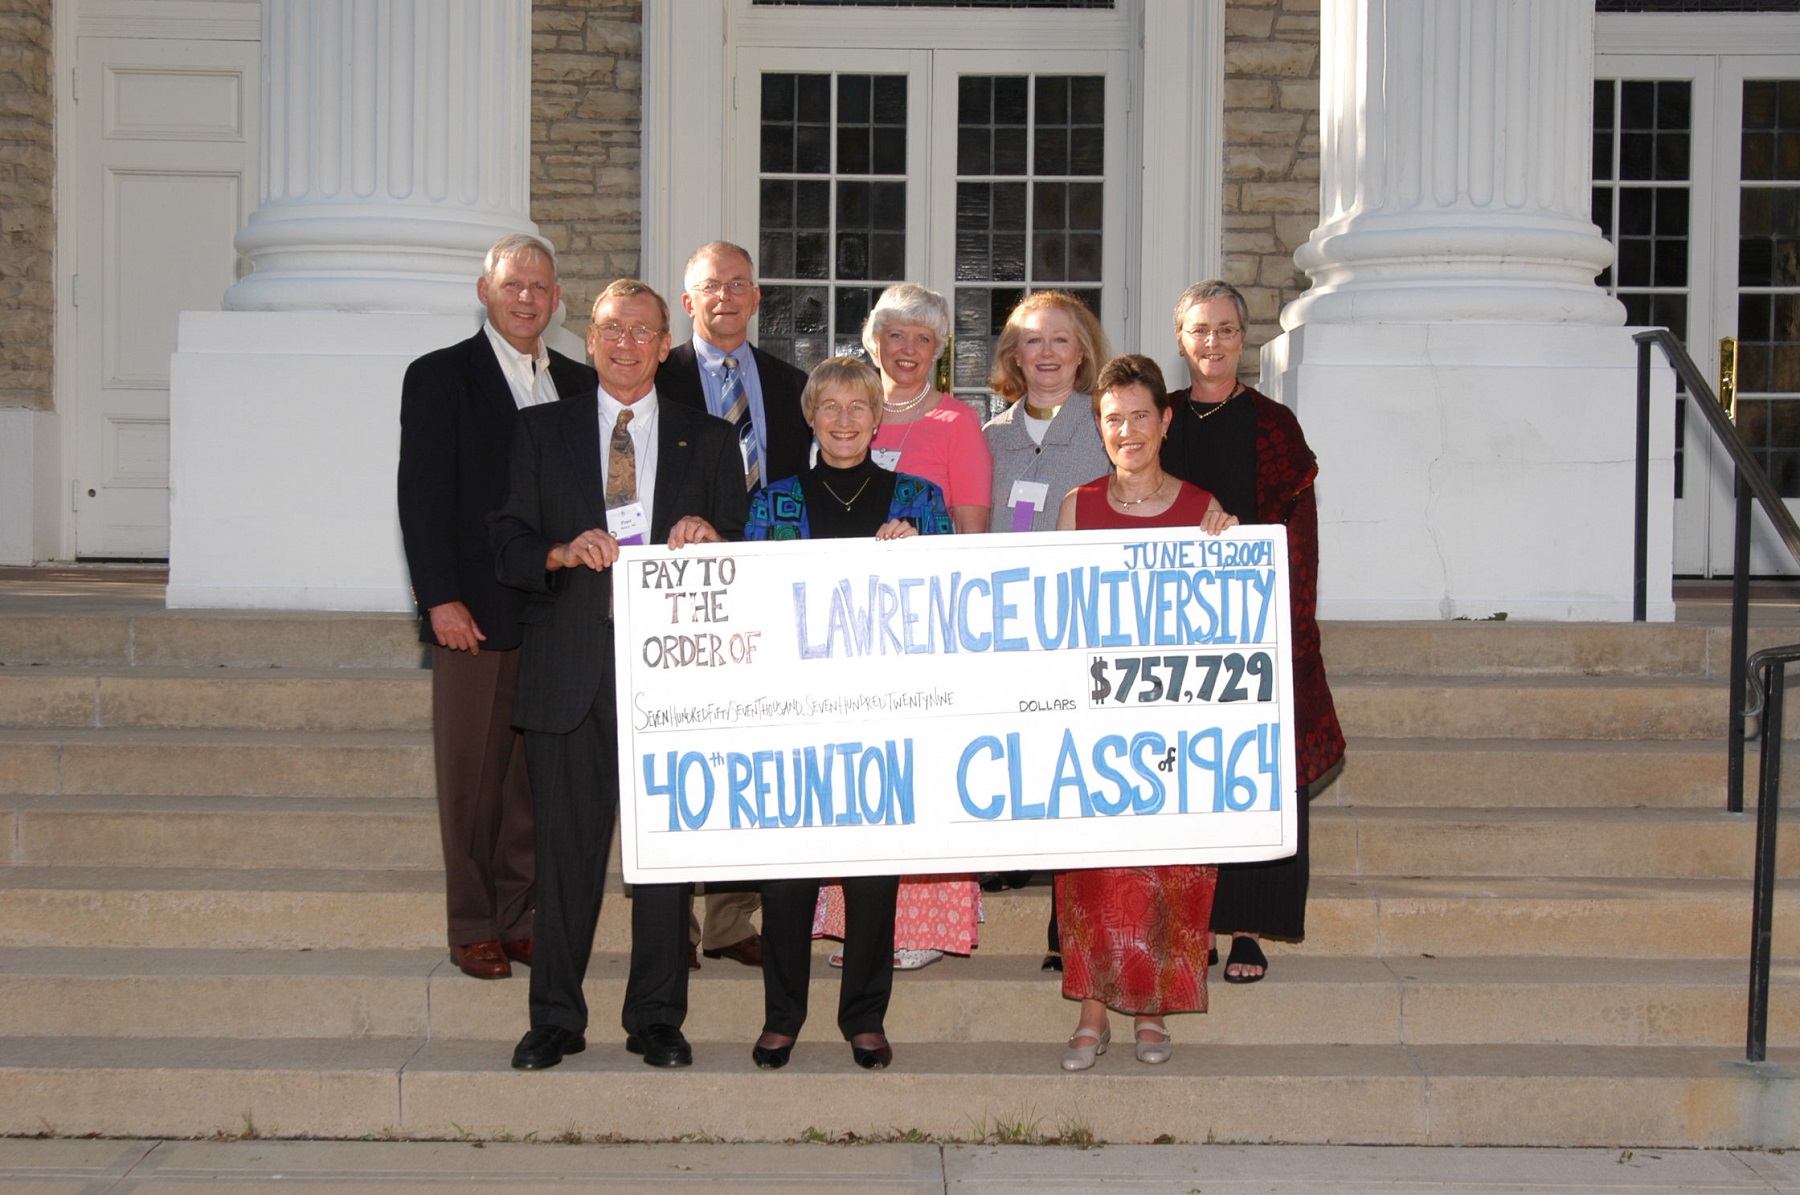 Bonnie Laird is seen front row to the right at a 2004 Reunion. Her and classmates are holding a sign showing the amount of the class's donation.